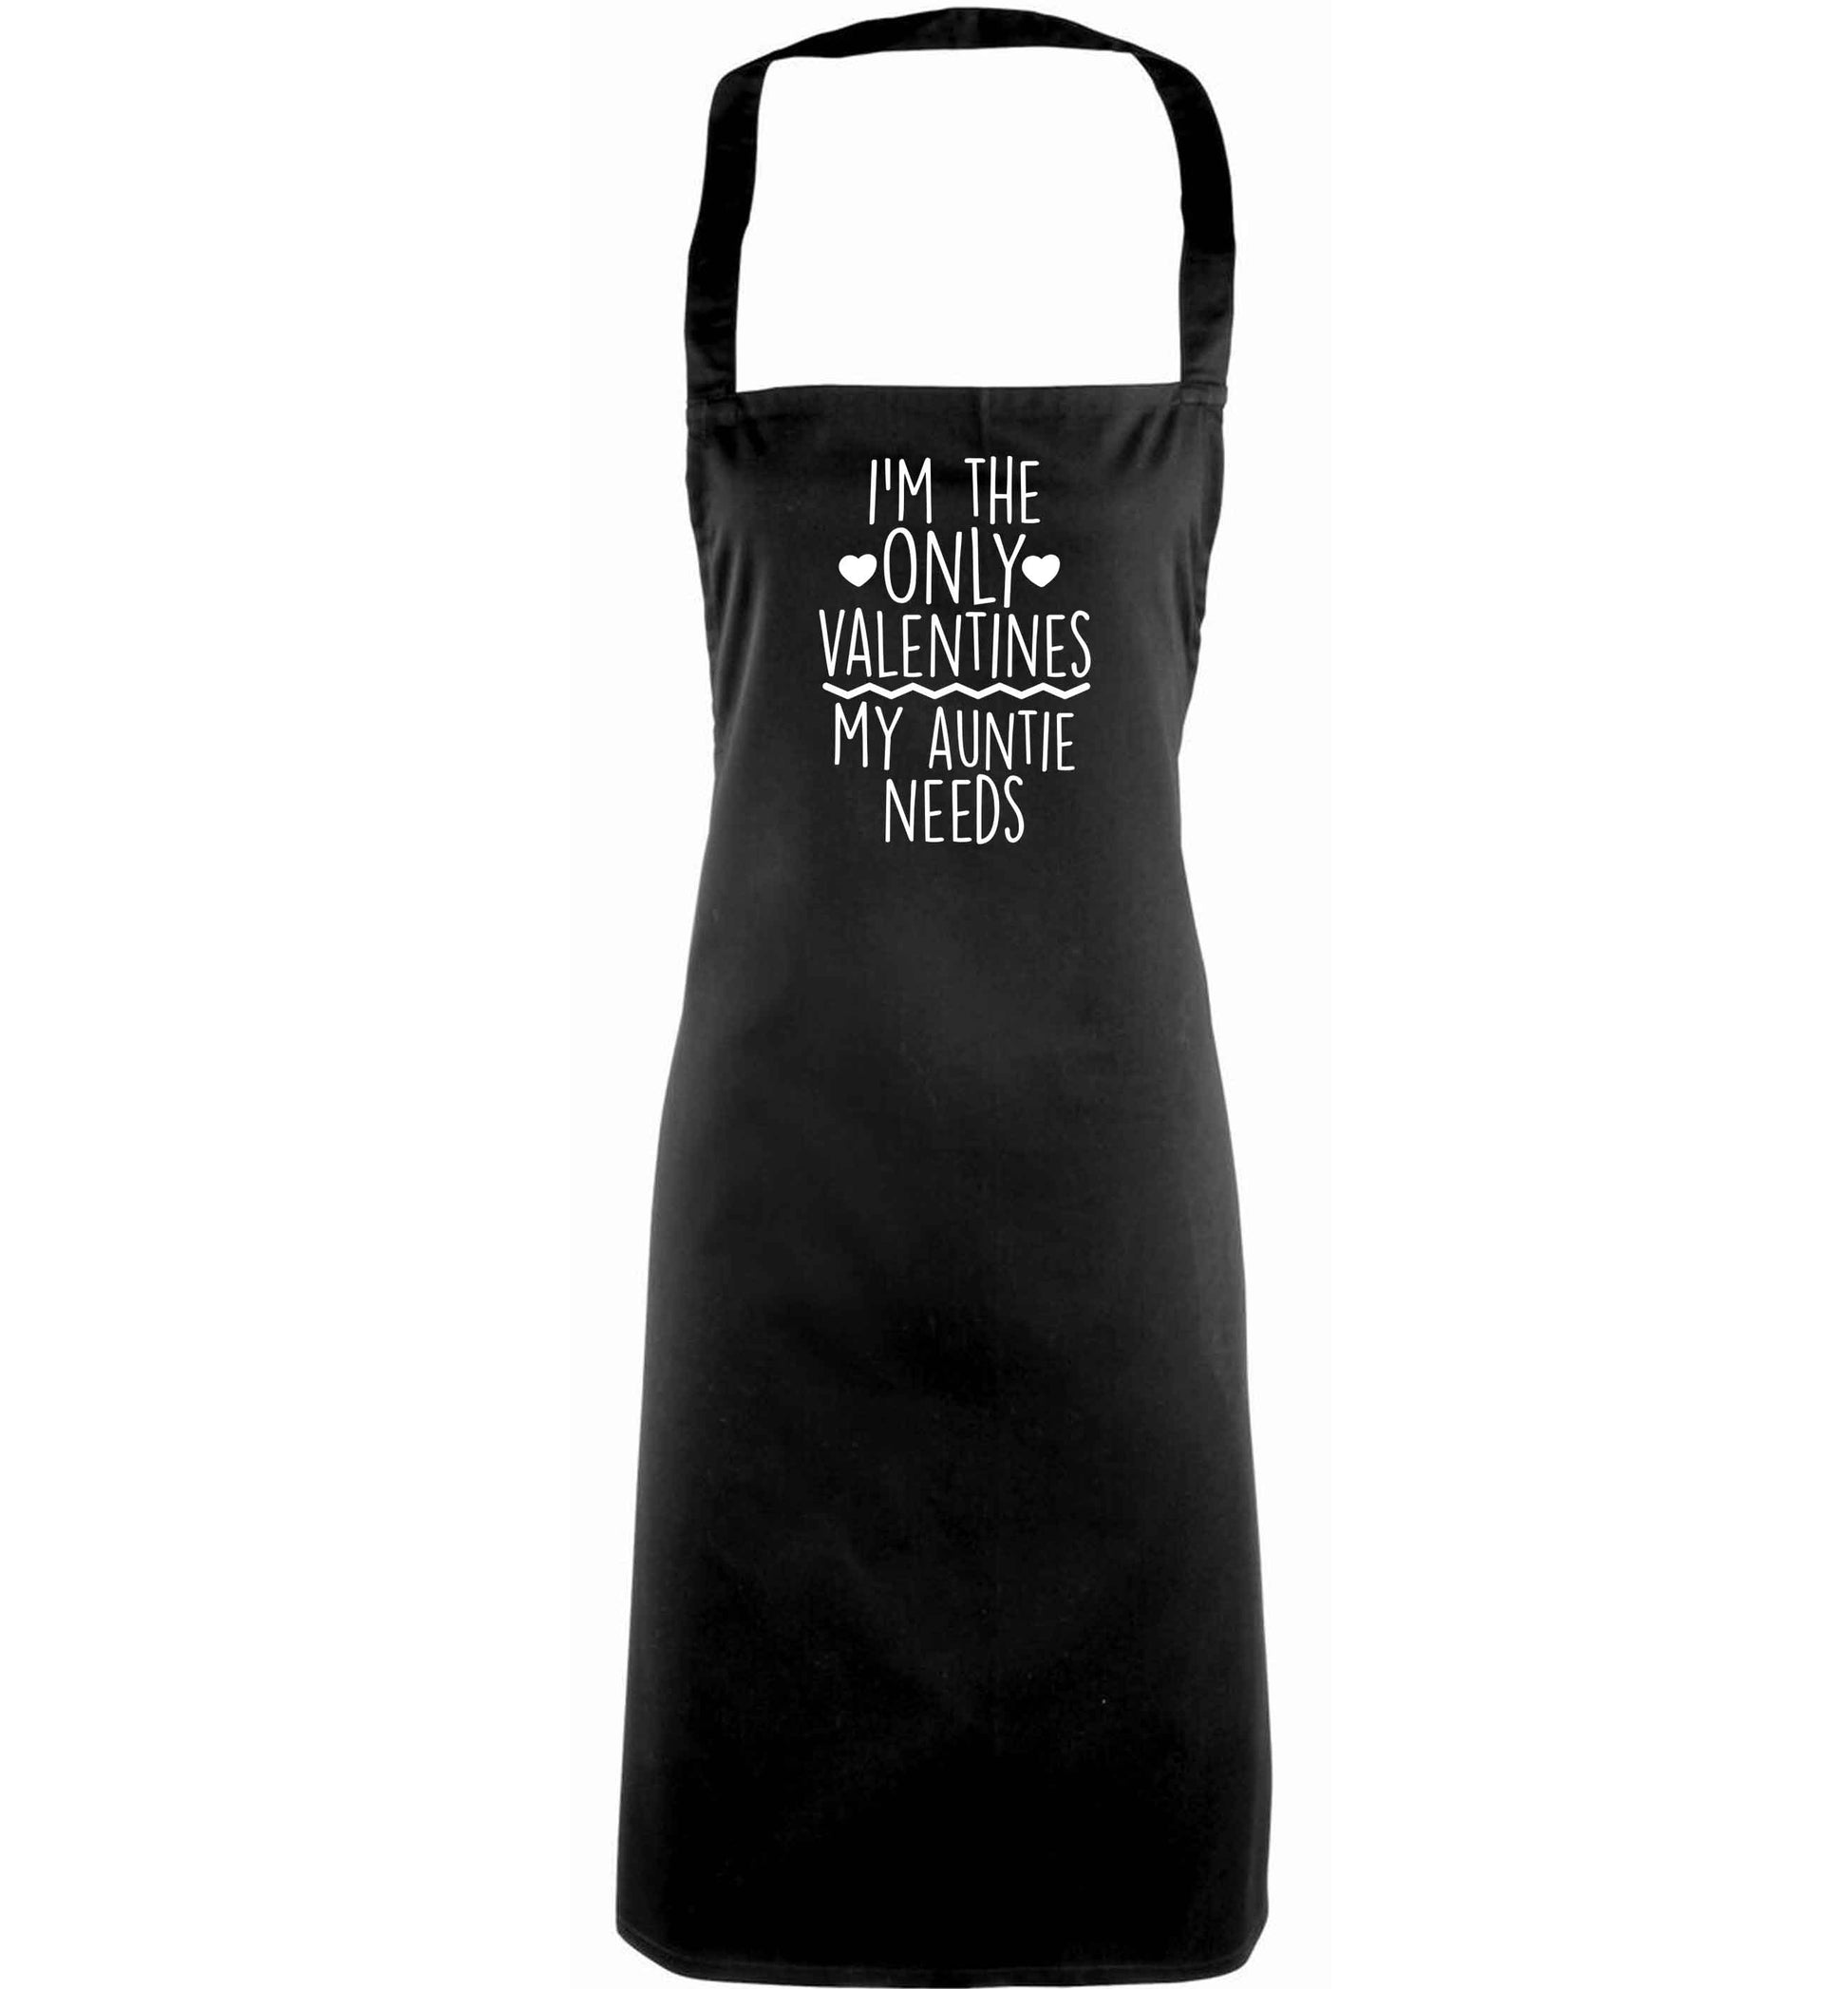 I'm the only valentines my auntie needs adults black apron